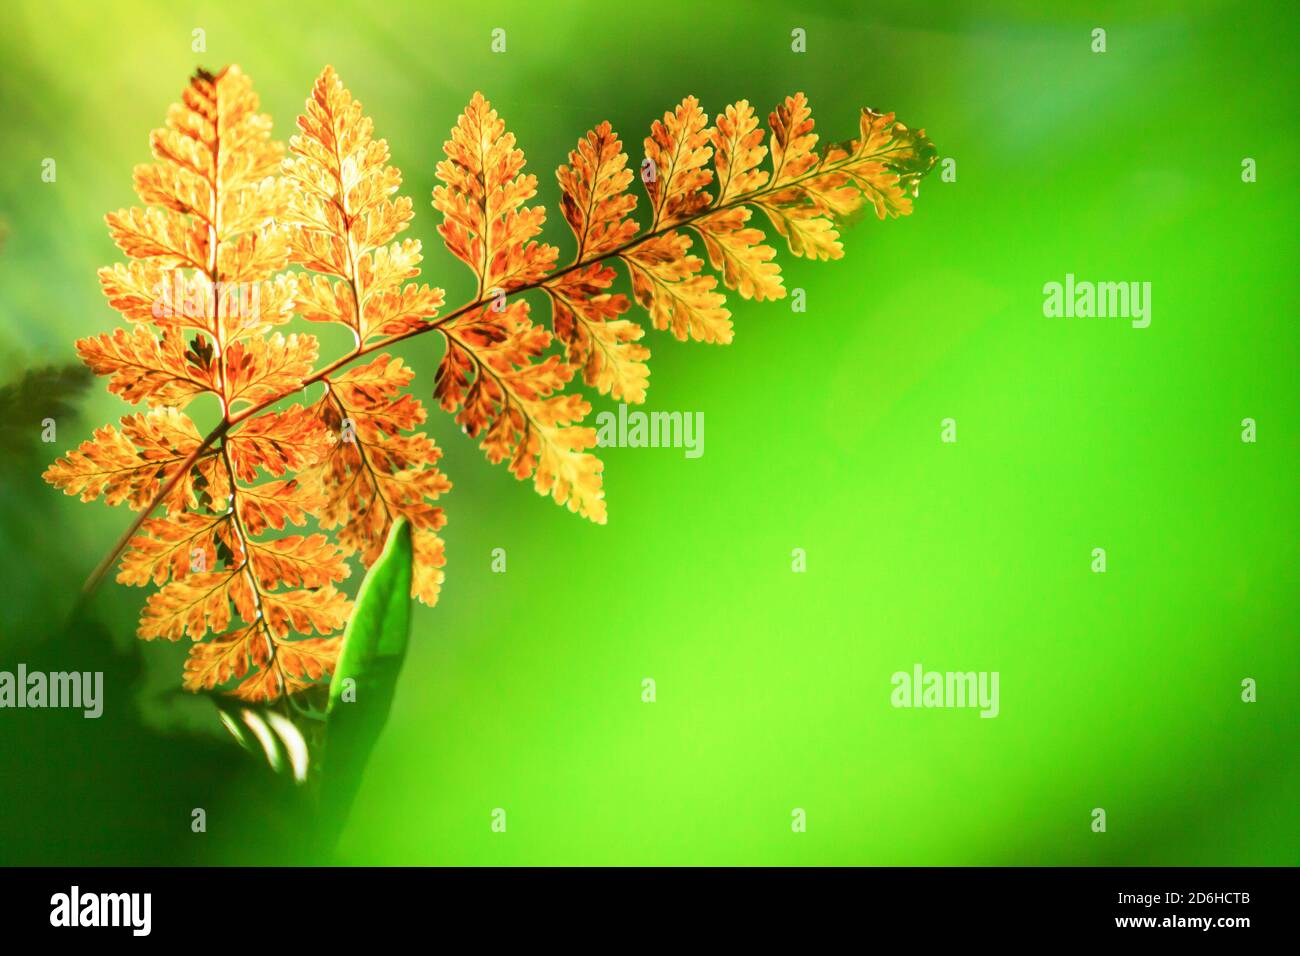 Bright and beautiful golden fern leaf in the morning light against green blurred background, the golden fern leaf growing in the branch of wild tree. Stock Photo